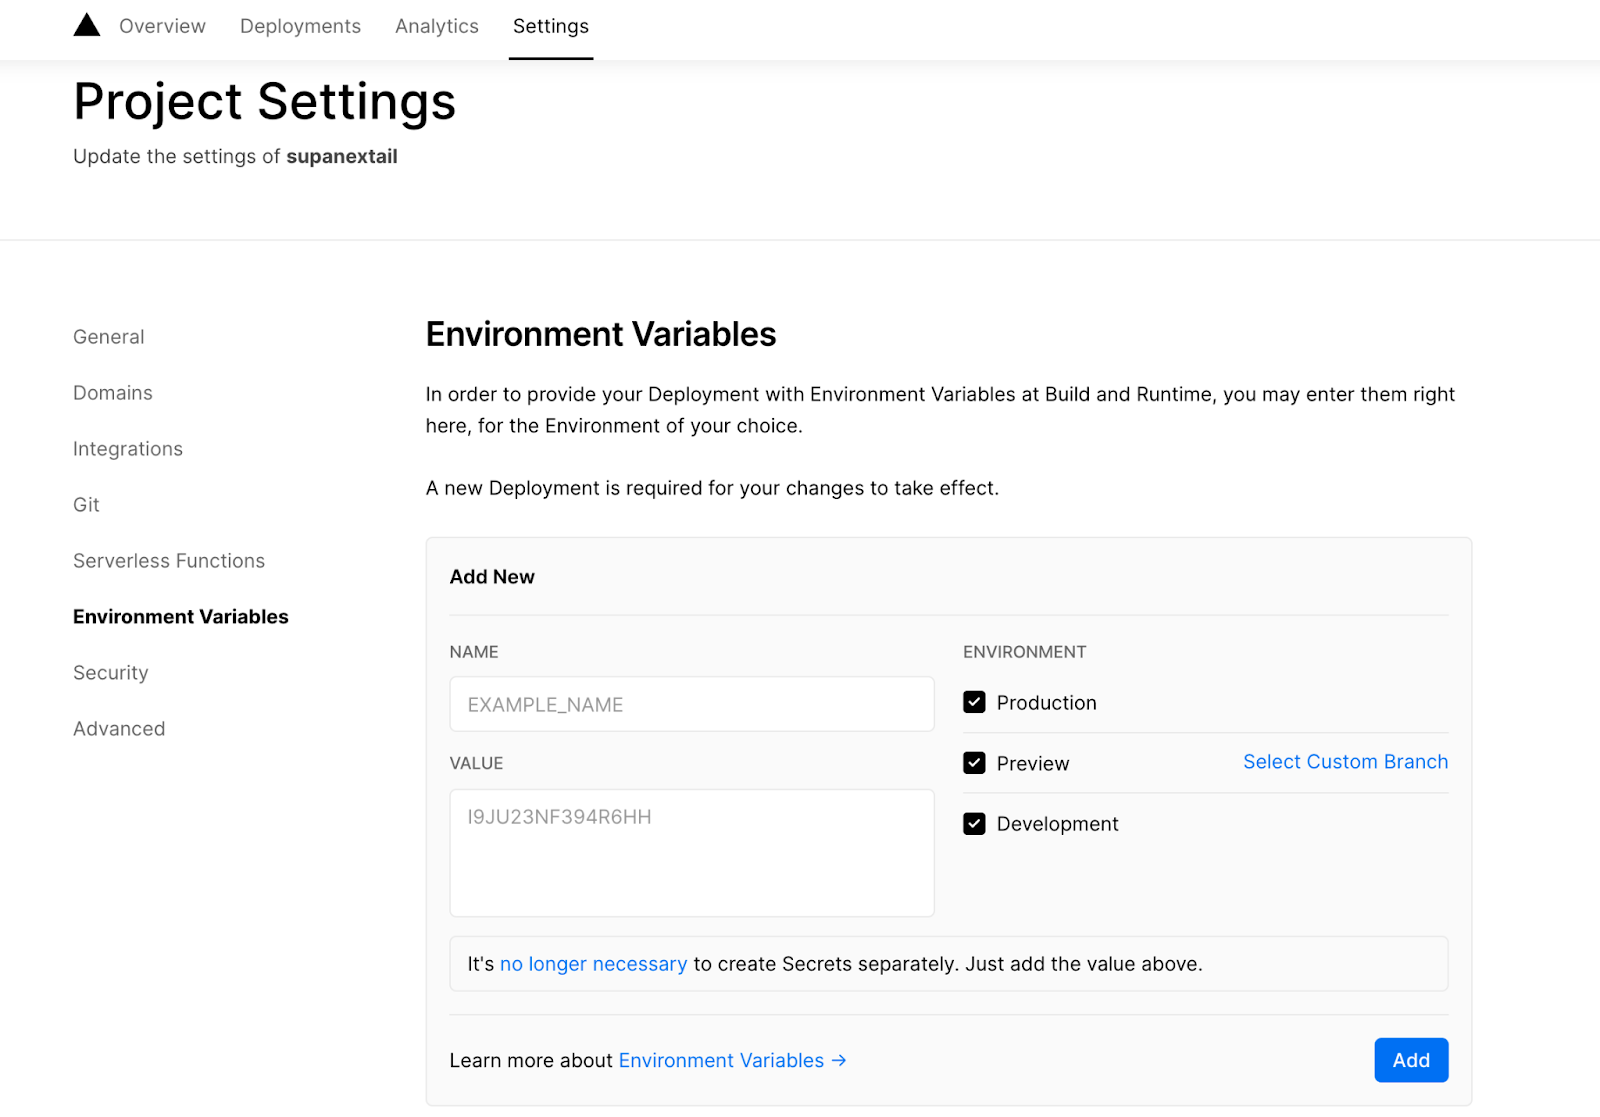 If you are using Vercel, this happens in the dashboard of your project, in the settings tab. You can add your variables in the 3 environments (production/preview/development).